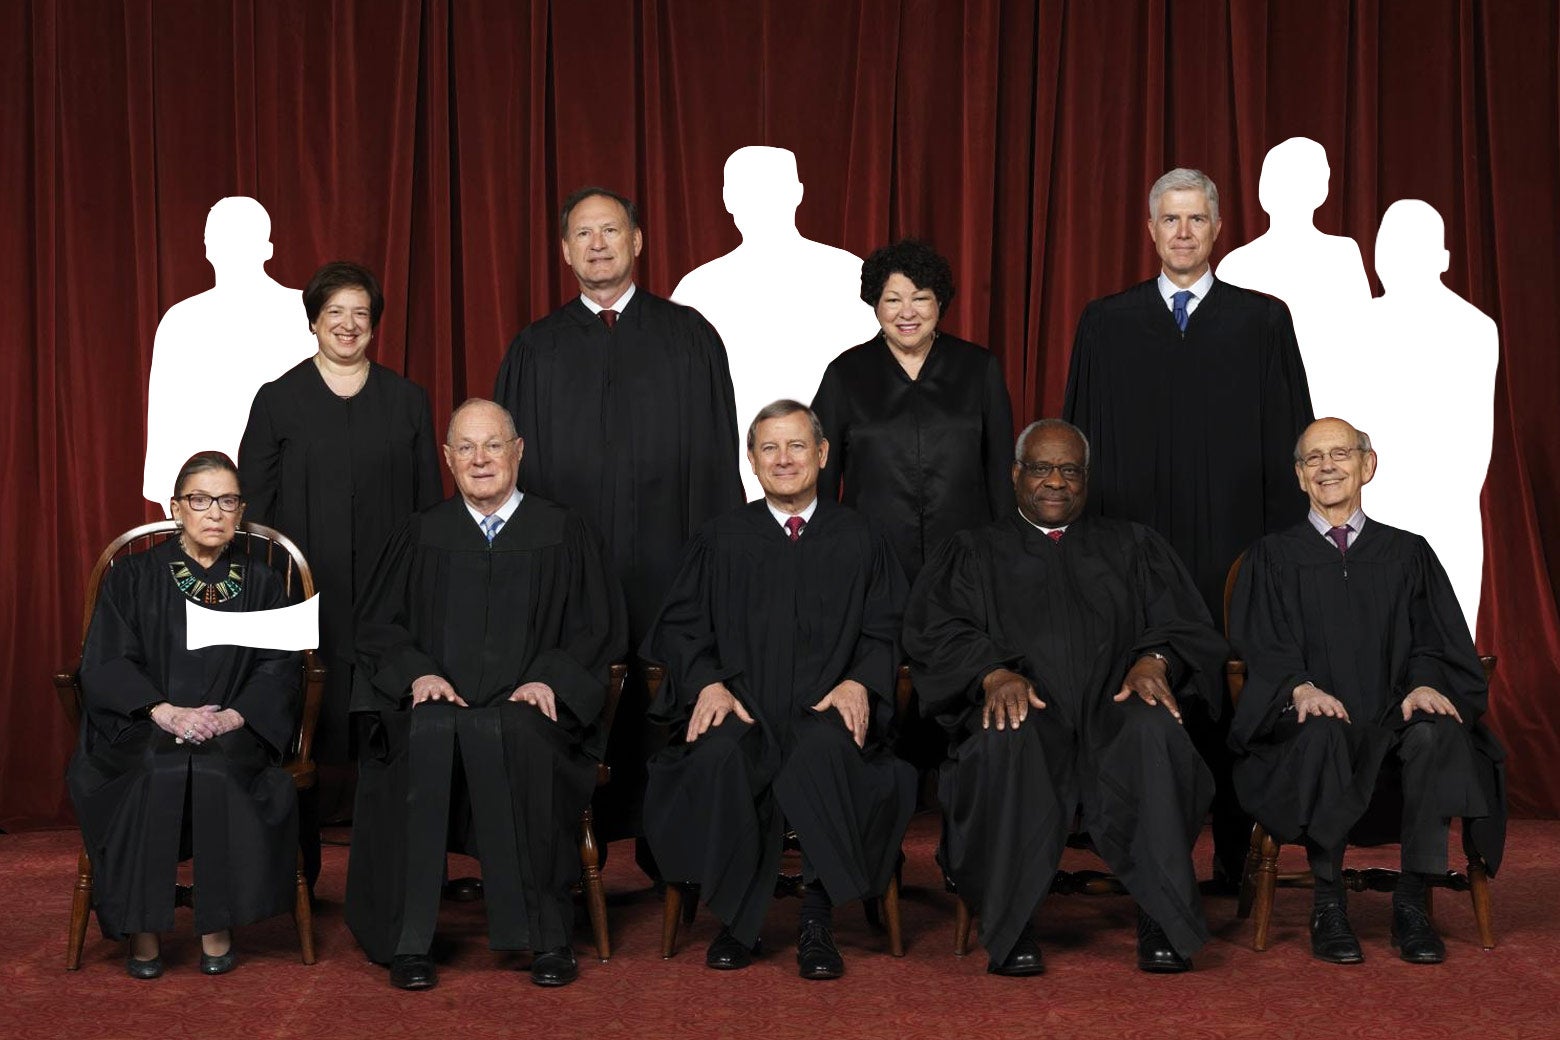 Supreme Court photo of sitting justices including Justice Anthony Kennedy, and four more cutouts.